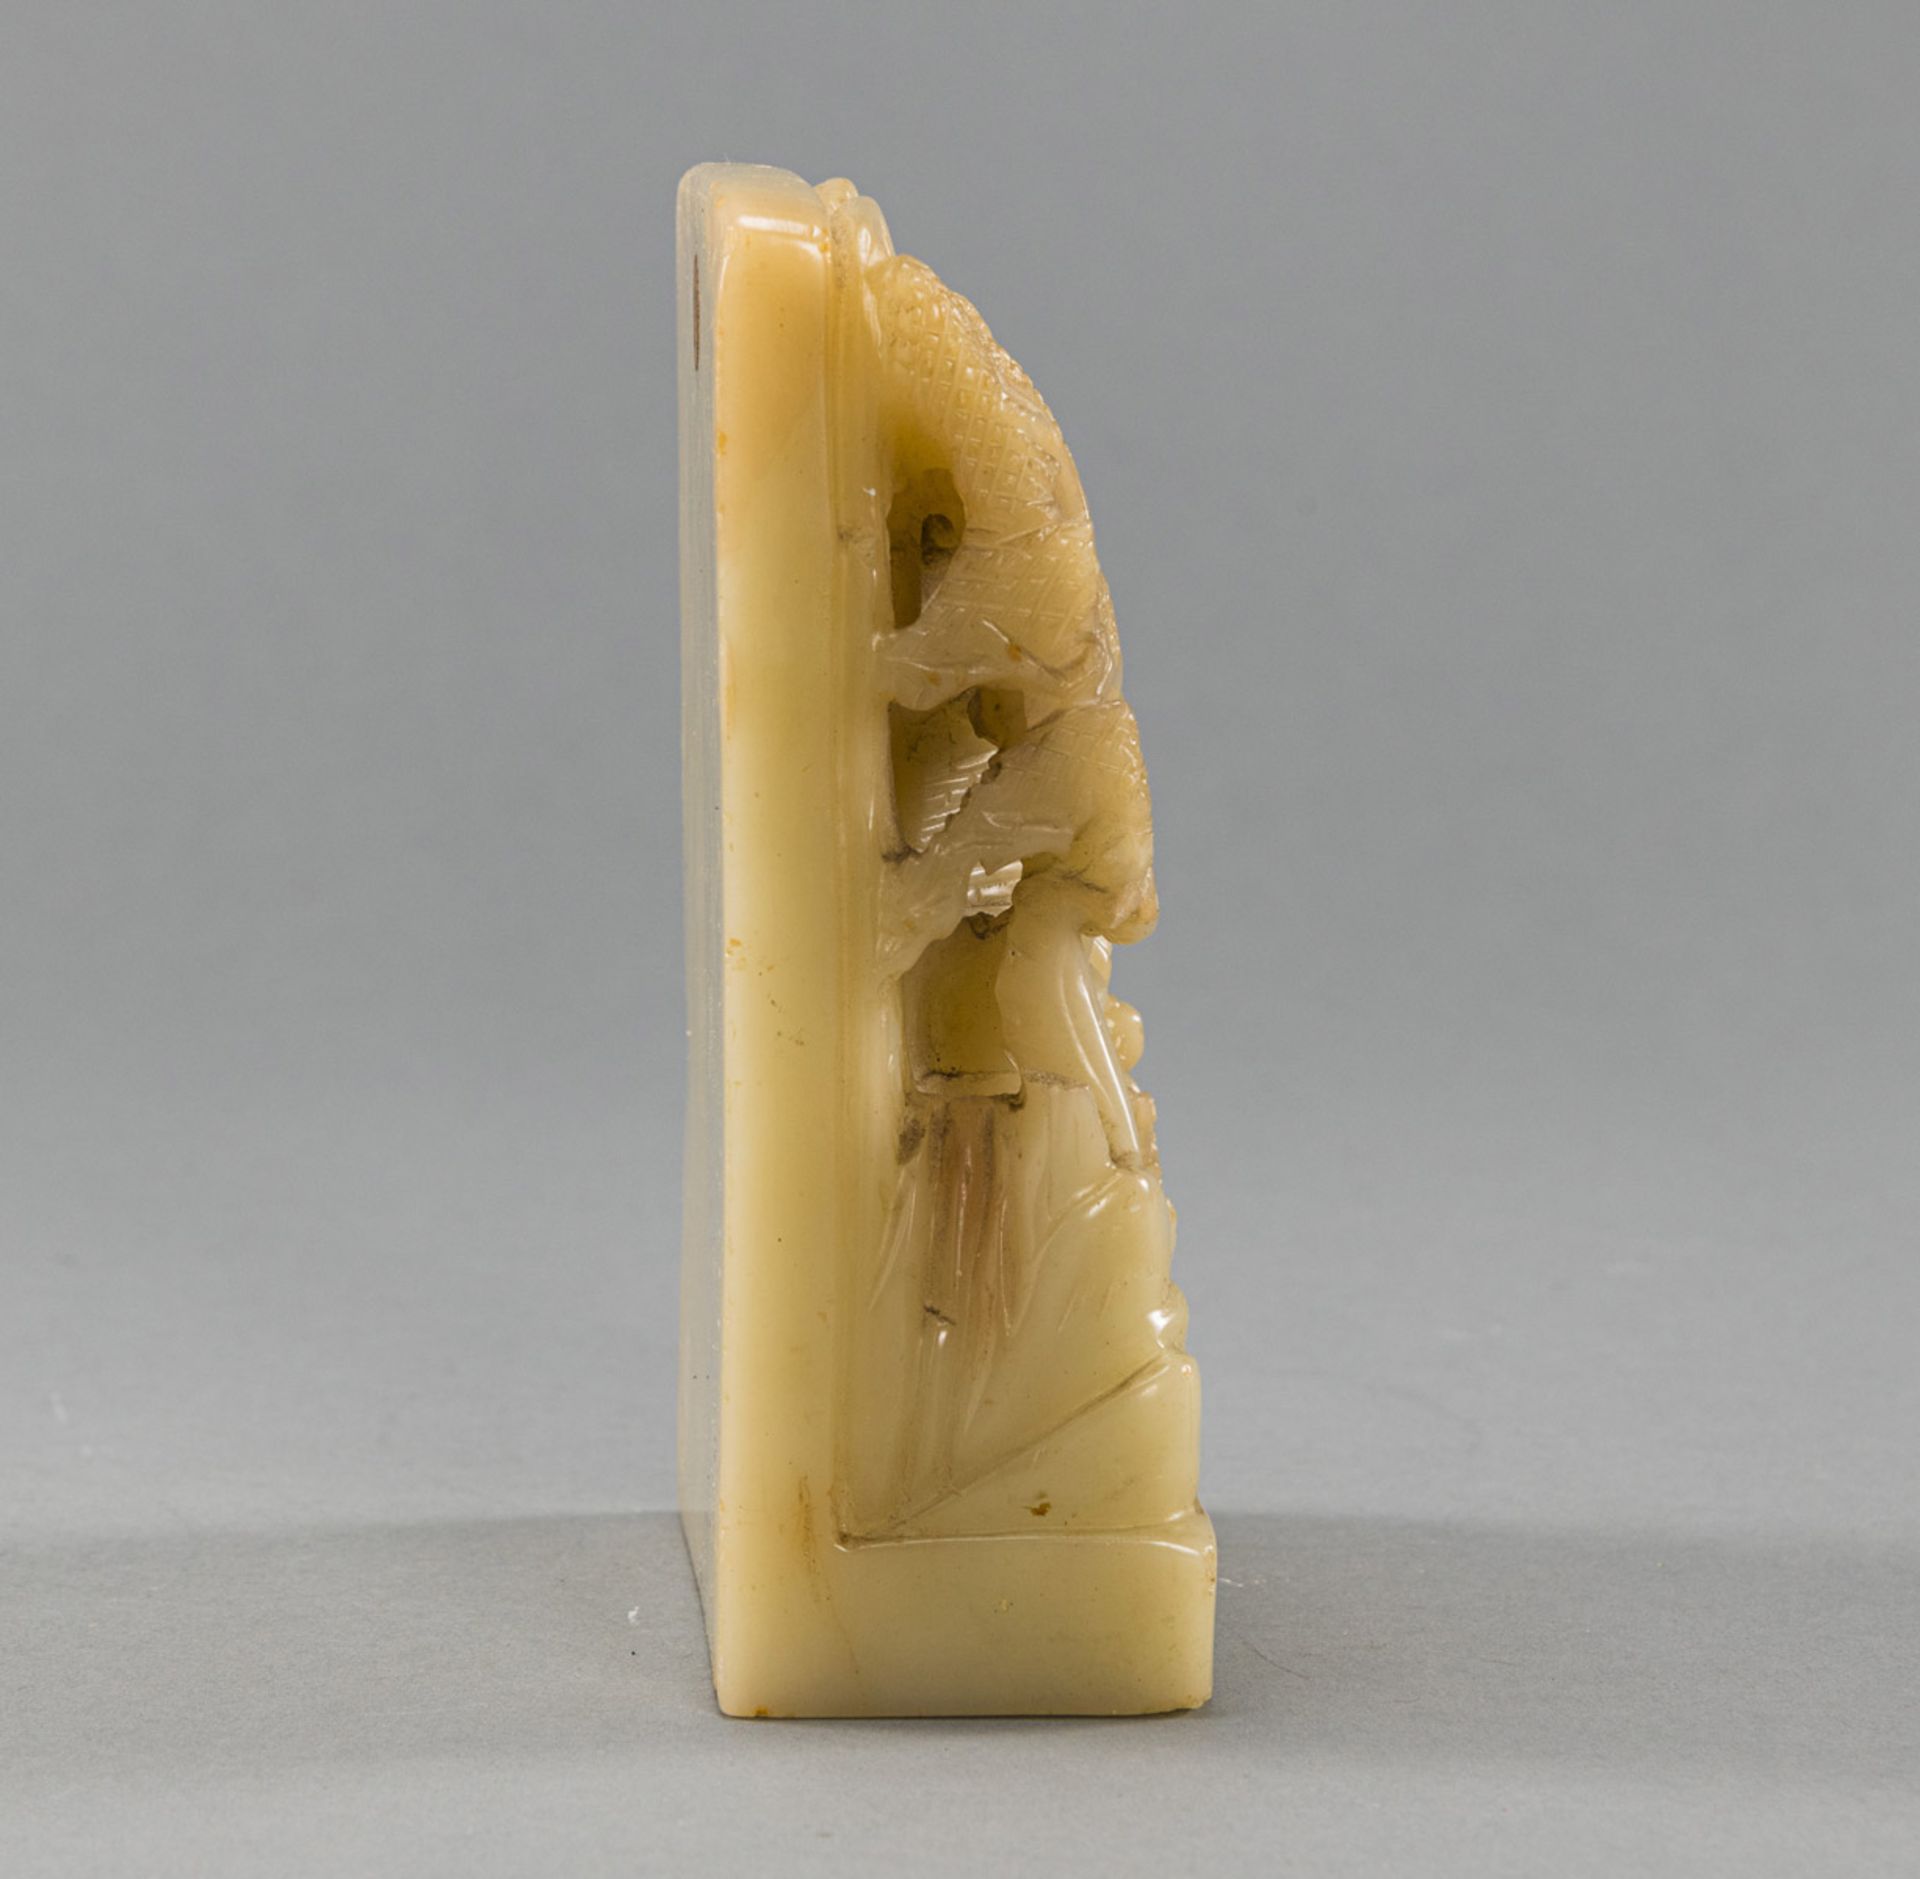 A JADE CARVING DEPICTING A FISHERMAN WITH HOUSE AND PINE TREE - Image 2 of 4